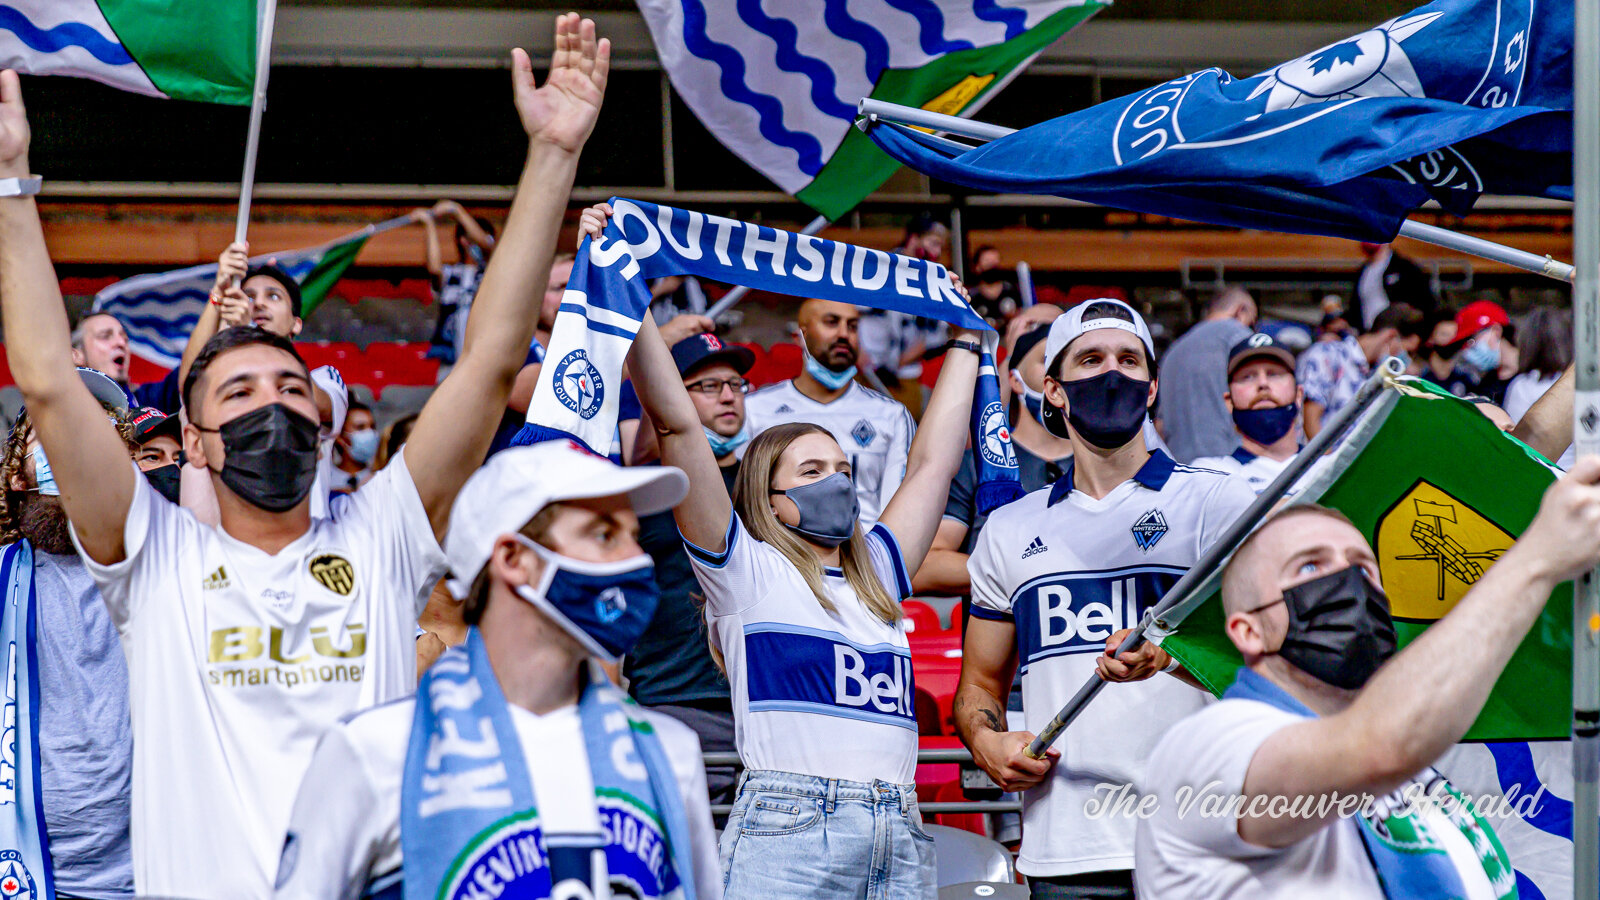 2021-08-29 Vancouver Southsiders 2.jpg